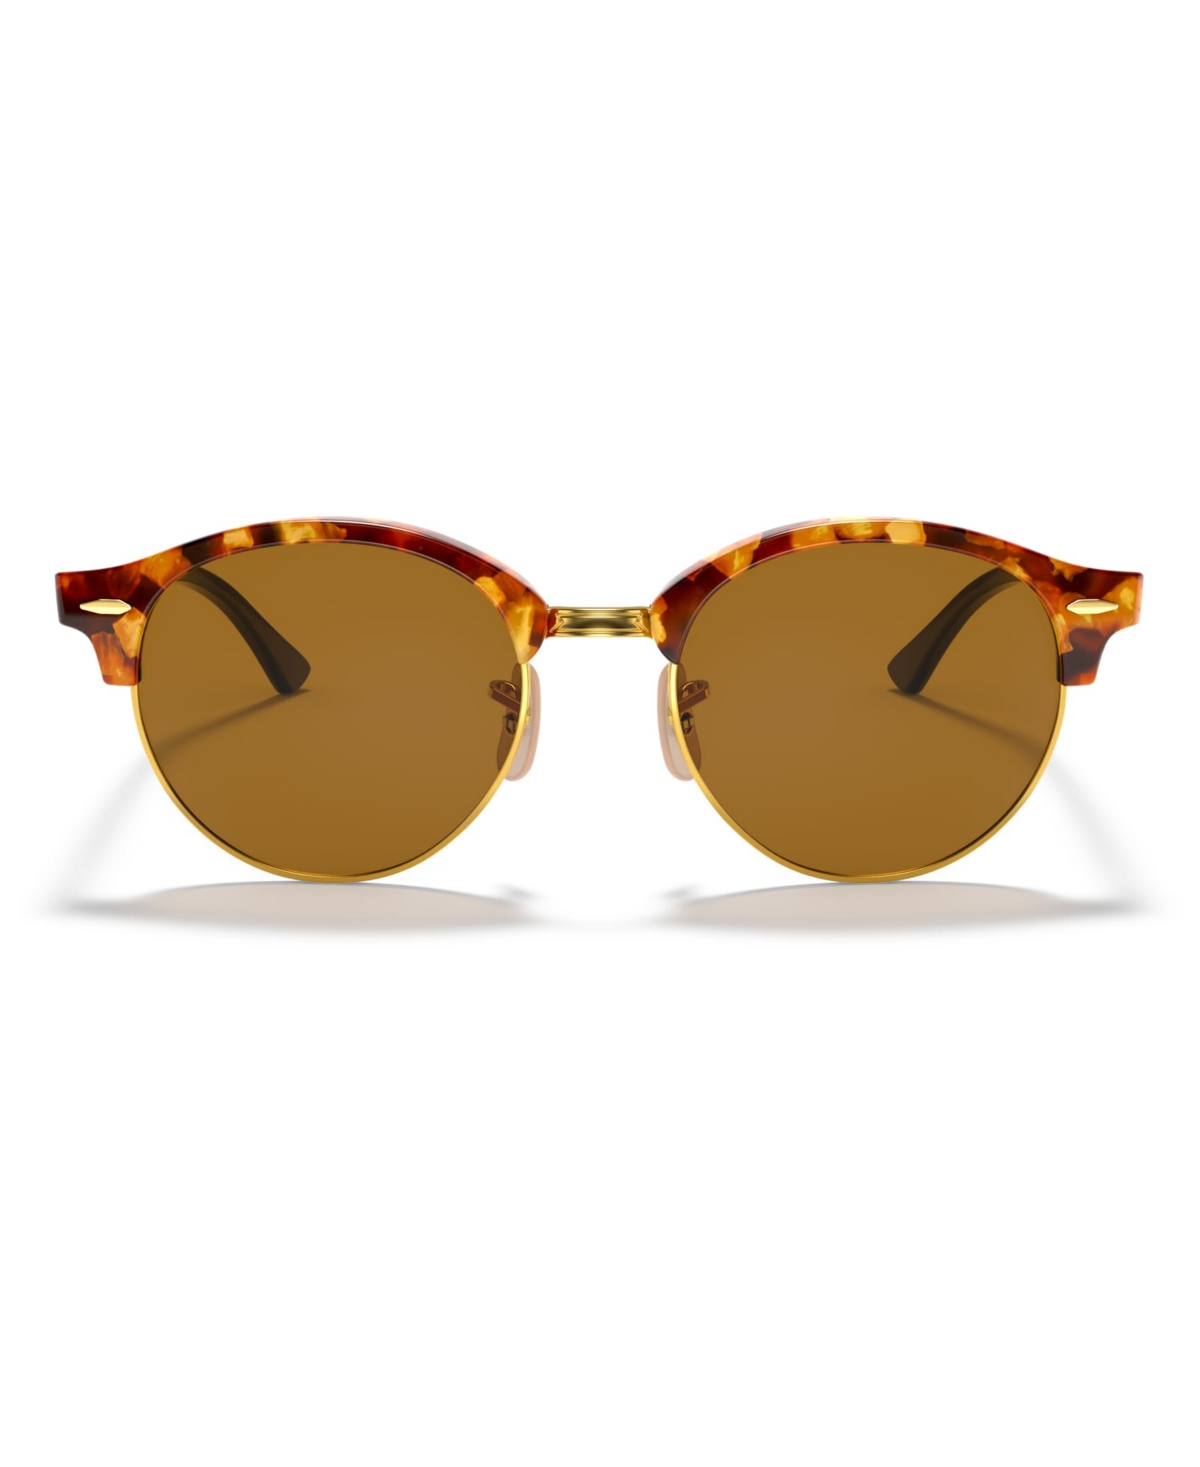 Ray Ban Clubround Classic Sunglasses In Brown,brown